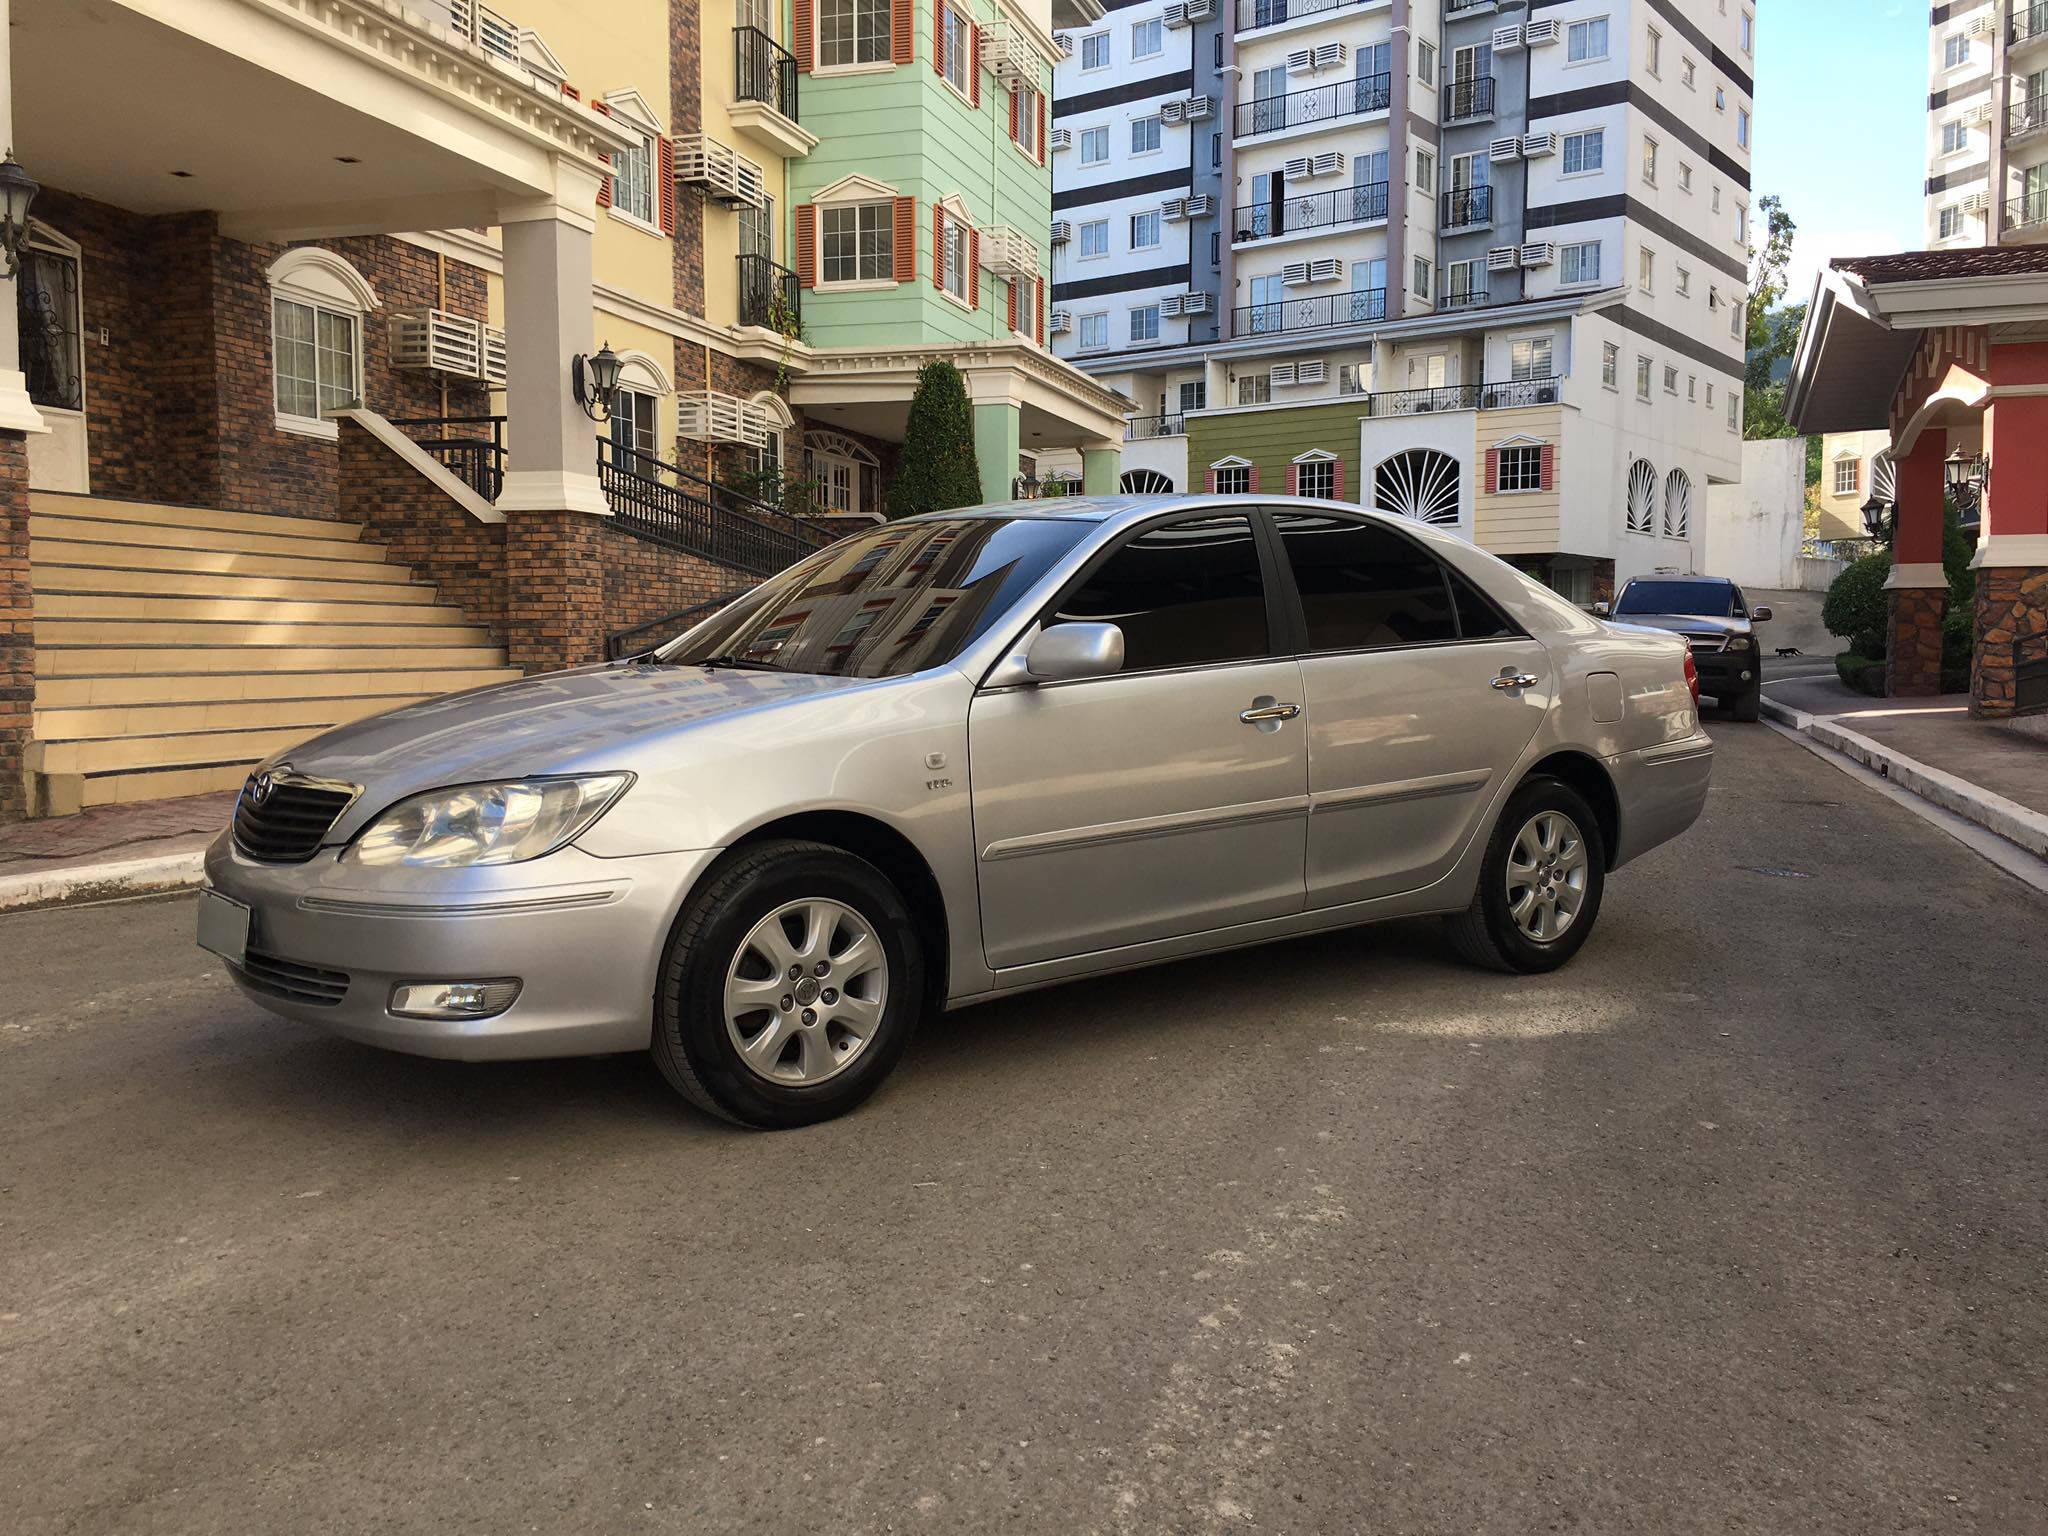 Used Toyota Camry 2004